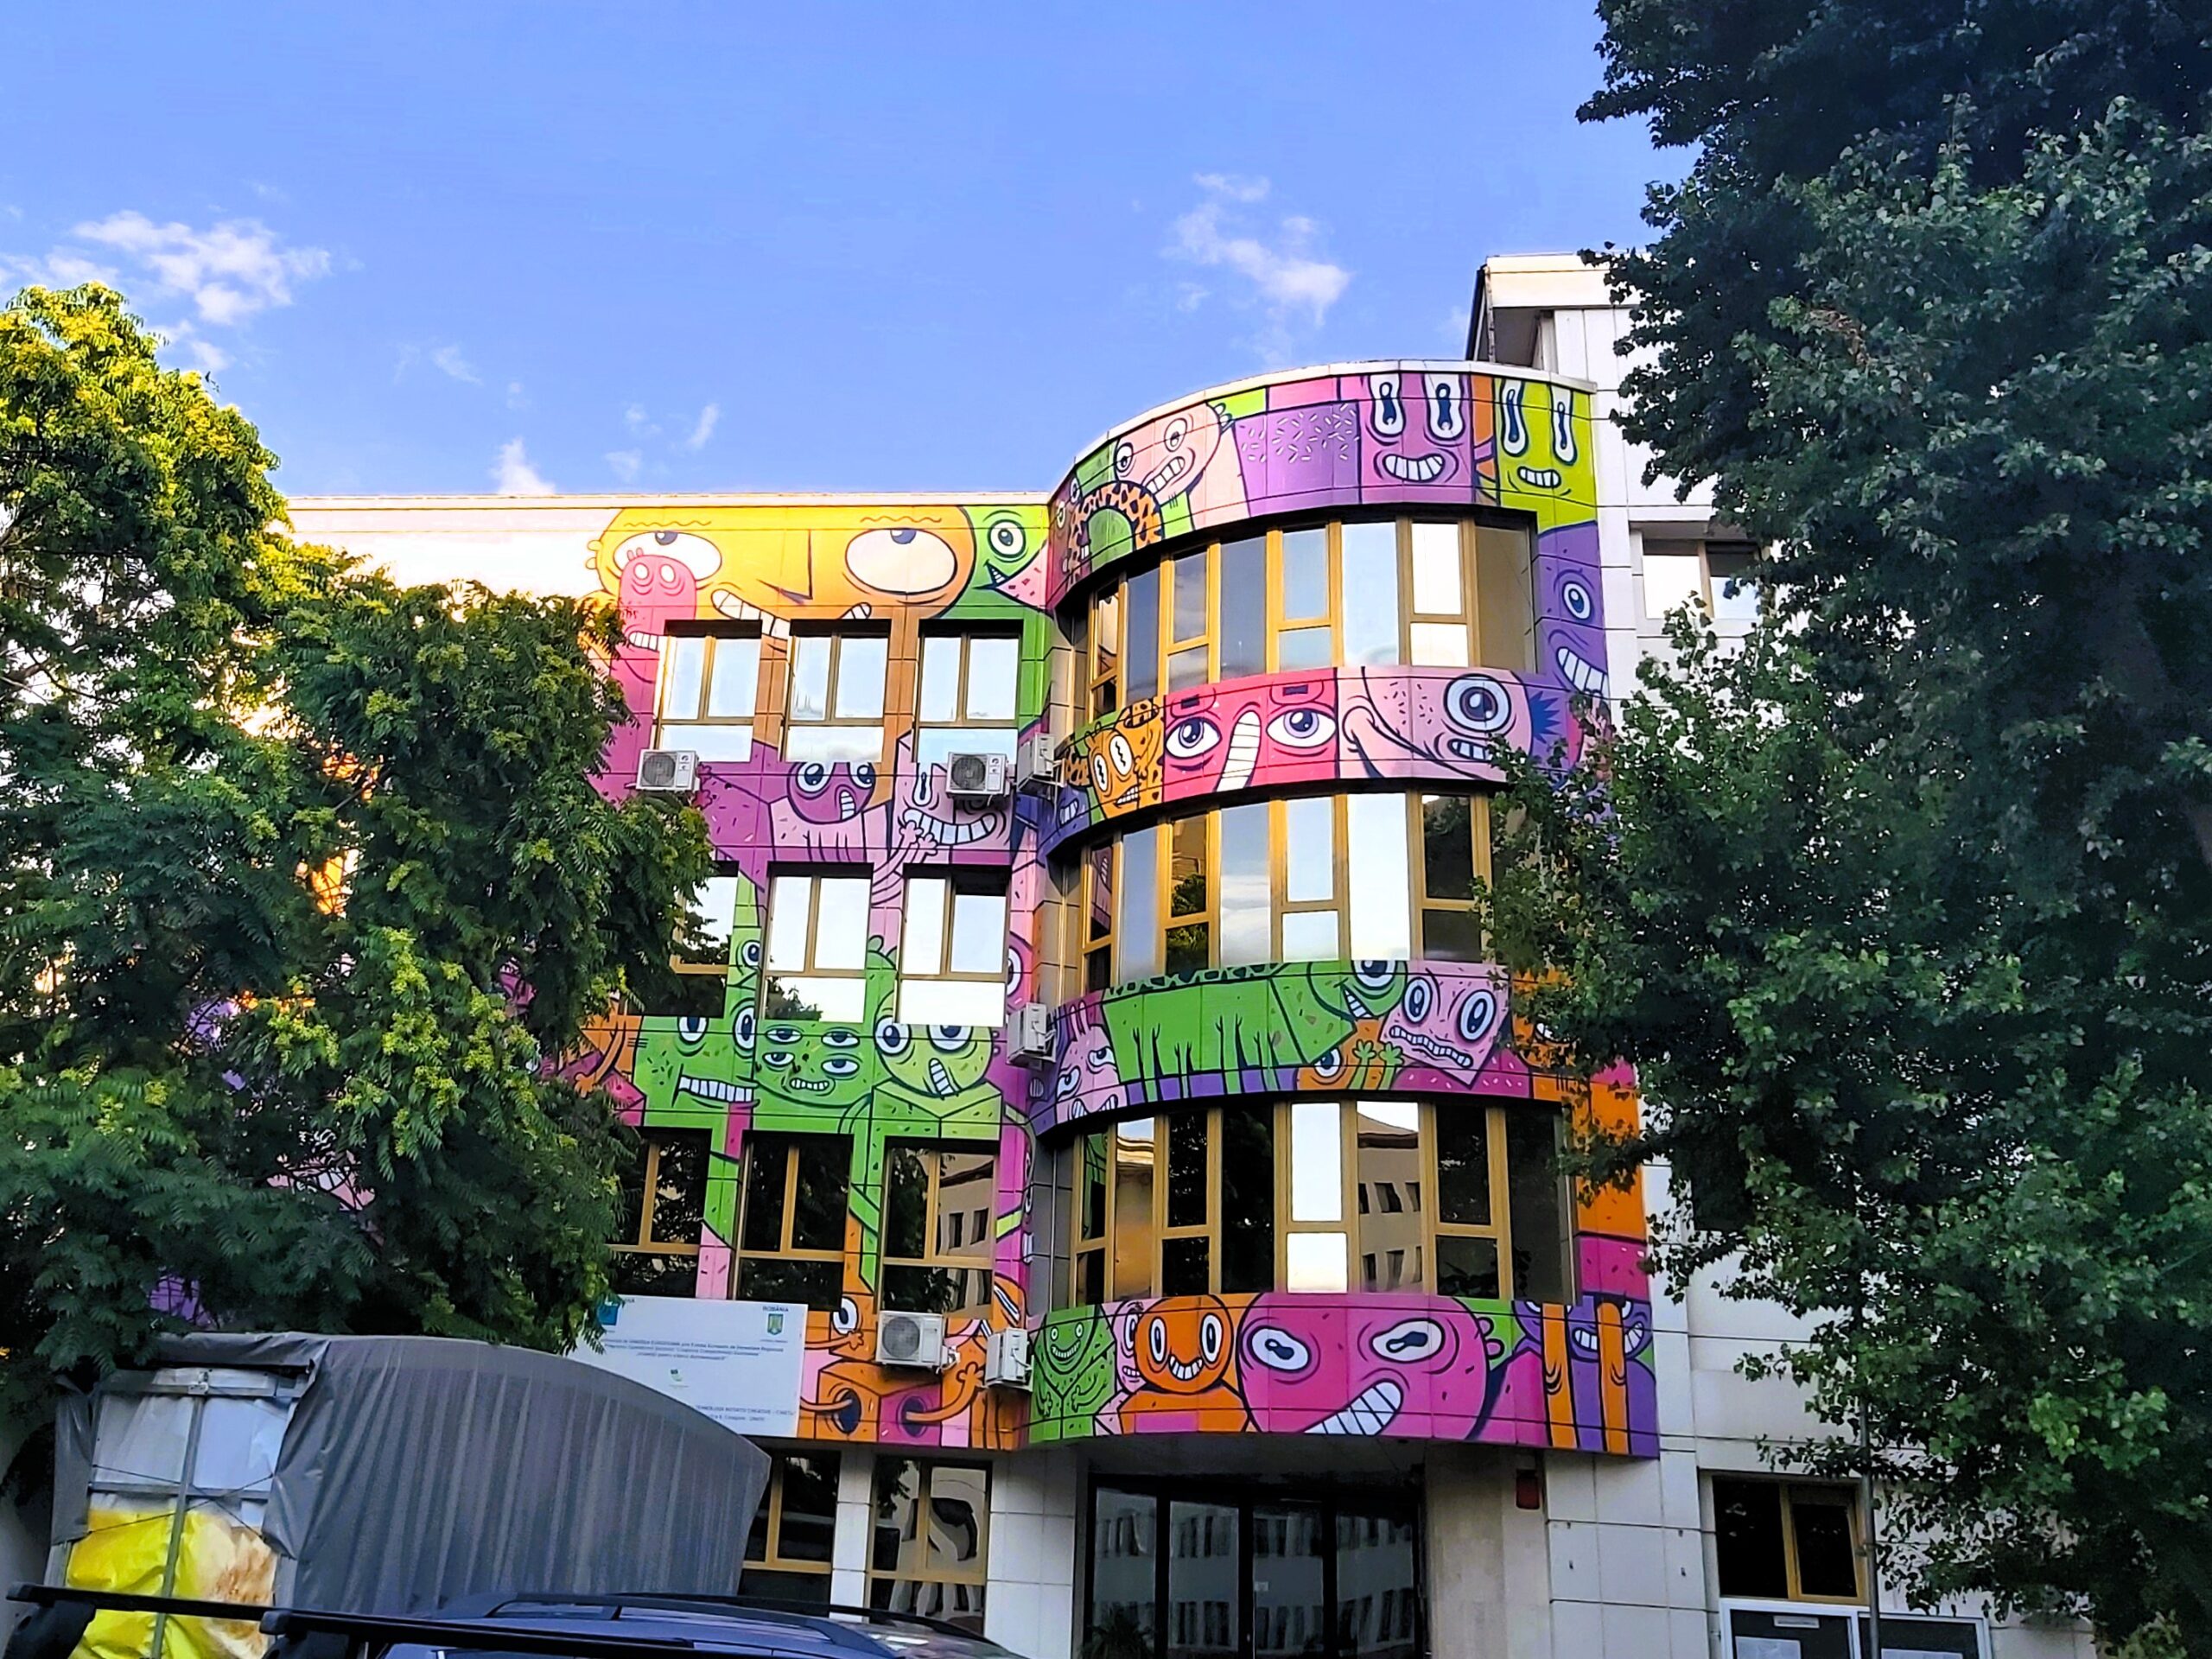 A building with colourful faces painted on it in București, Romania